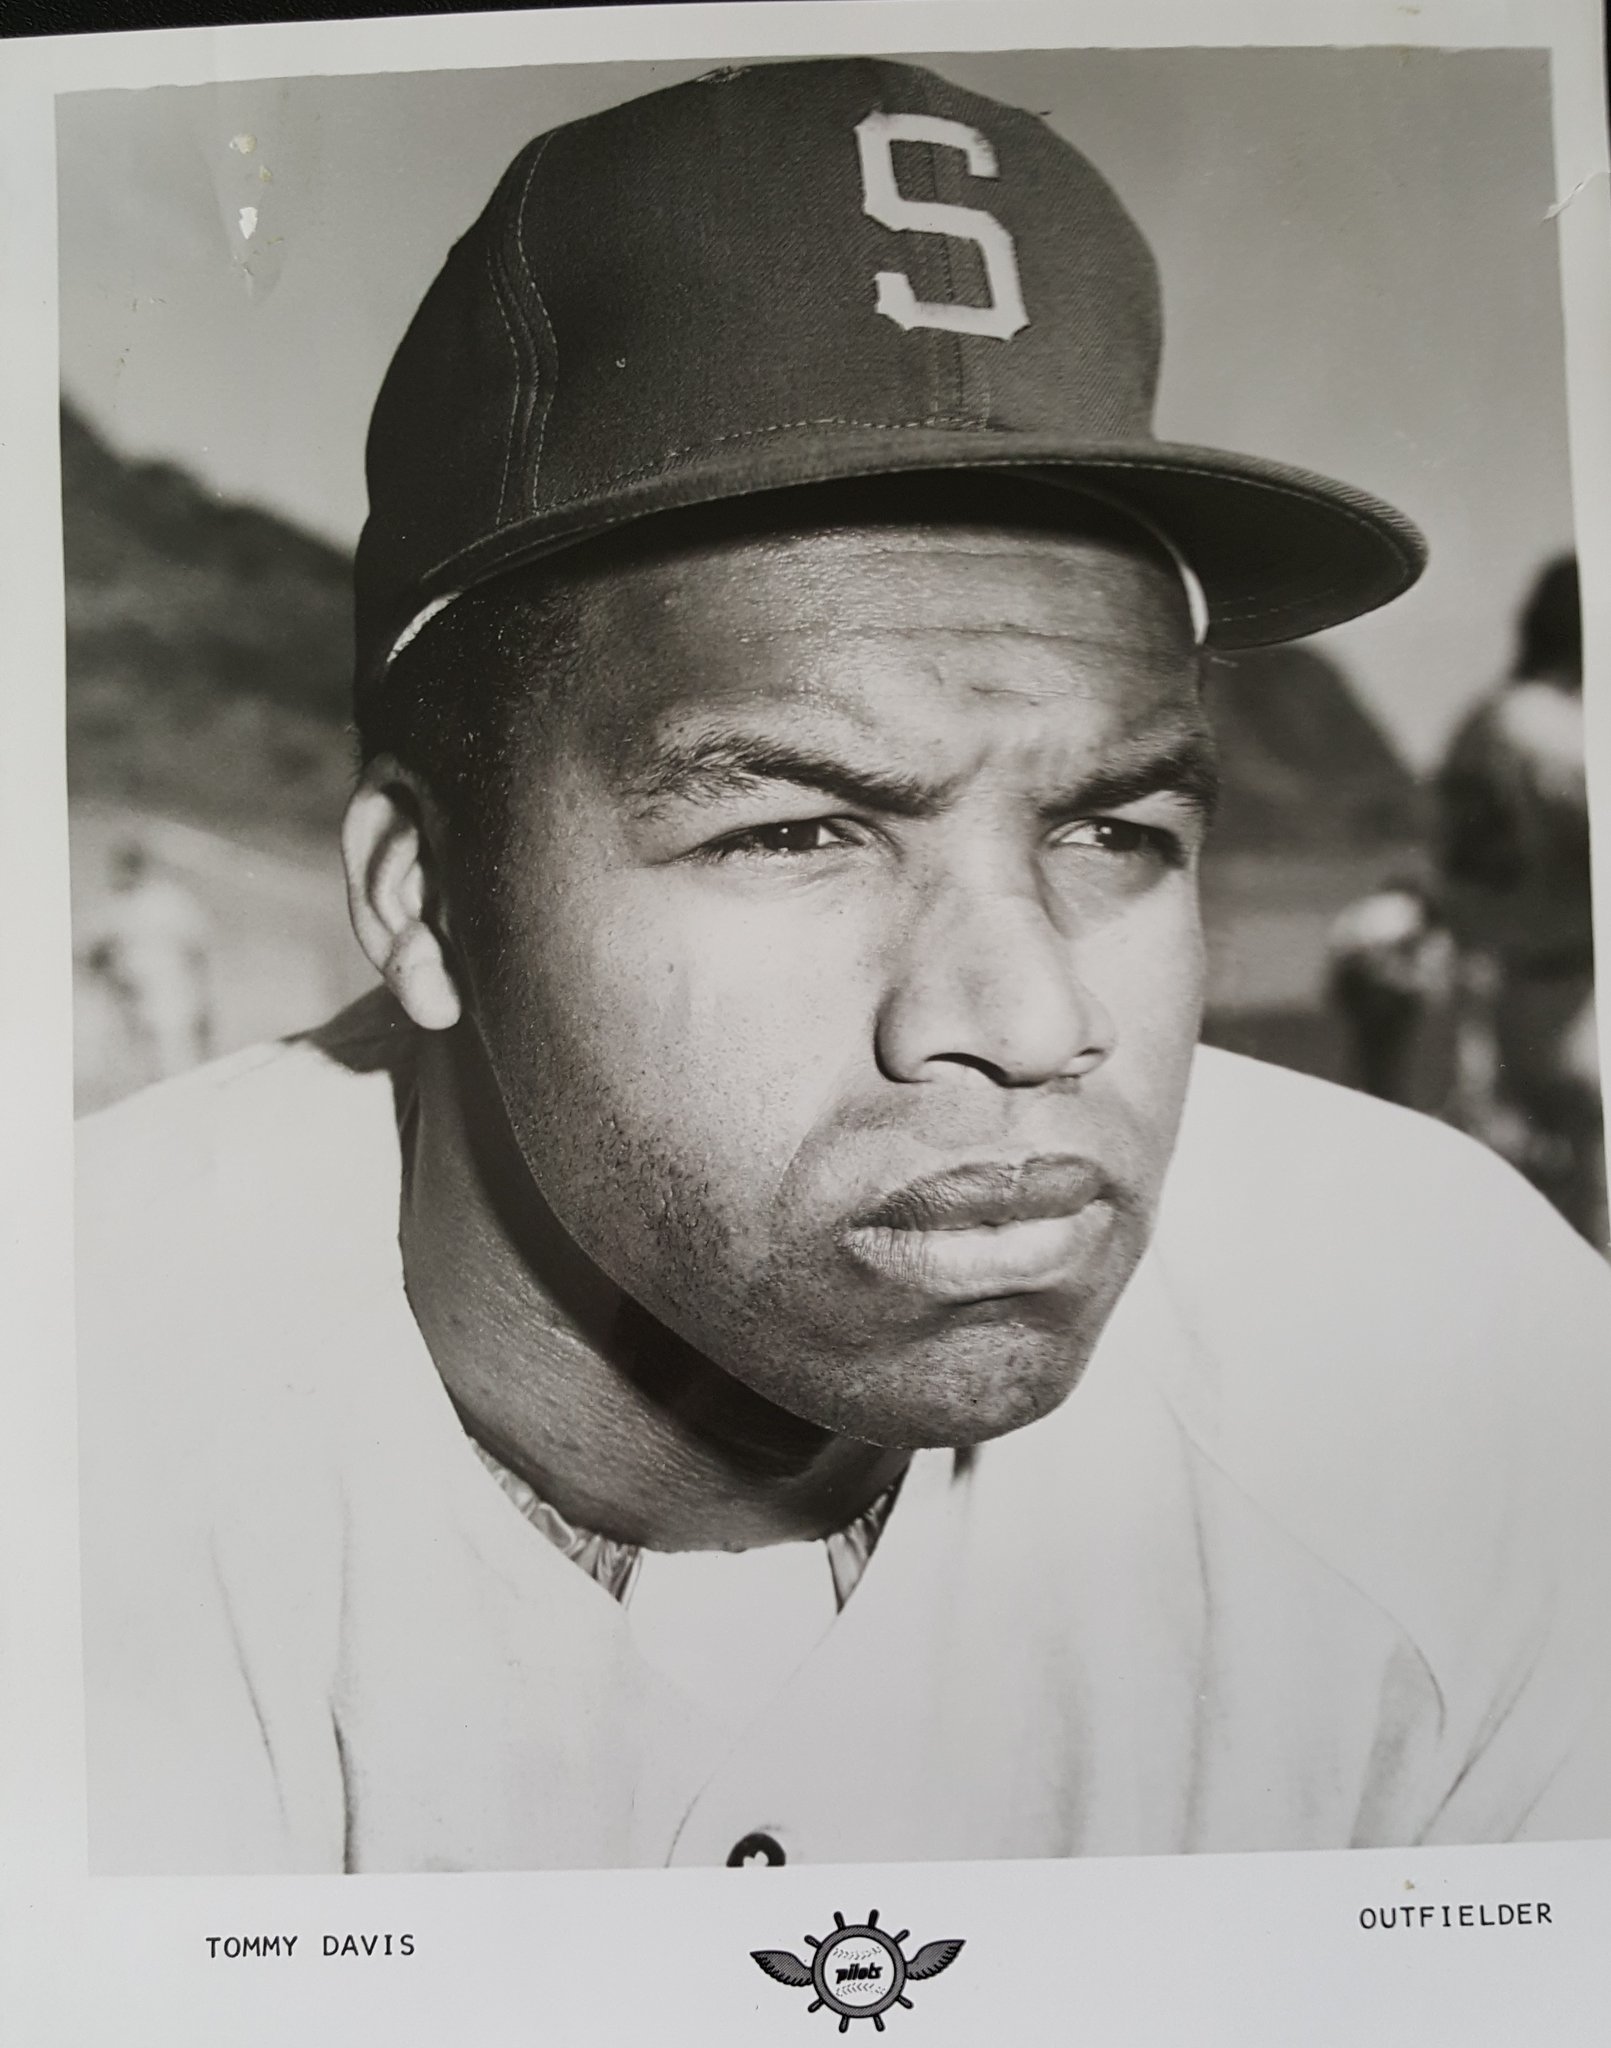 Happy 80th Birthday to the all-time RBI leader (80)of the Seattle Pilots: Tommy Davis. 